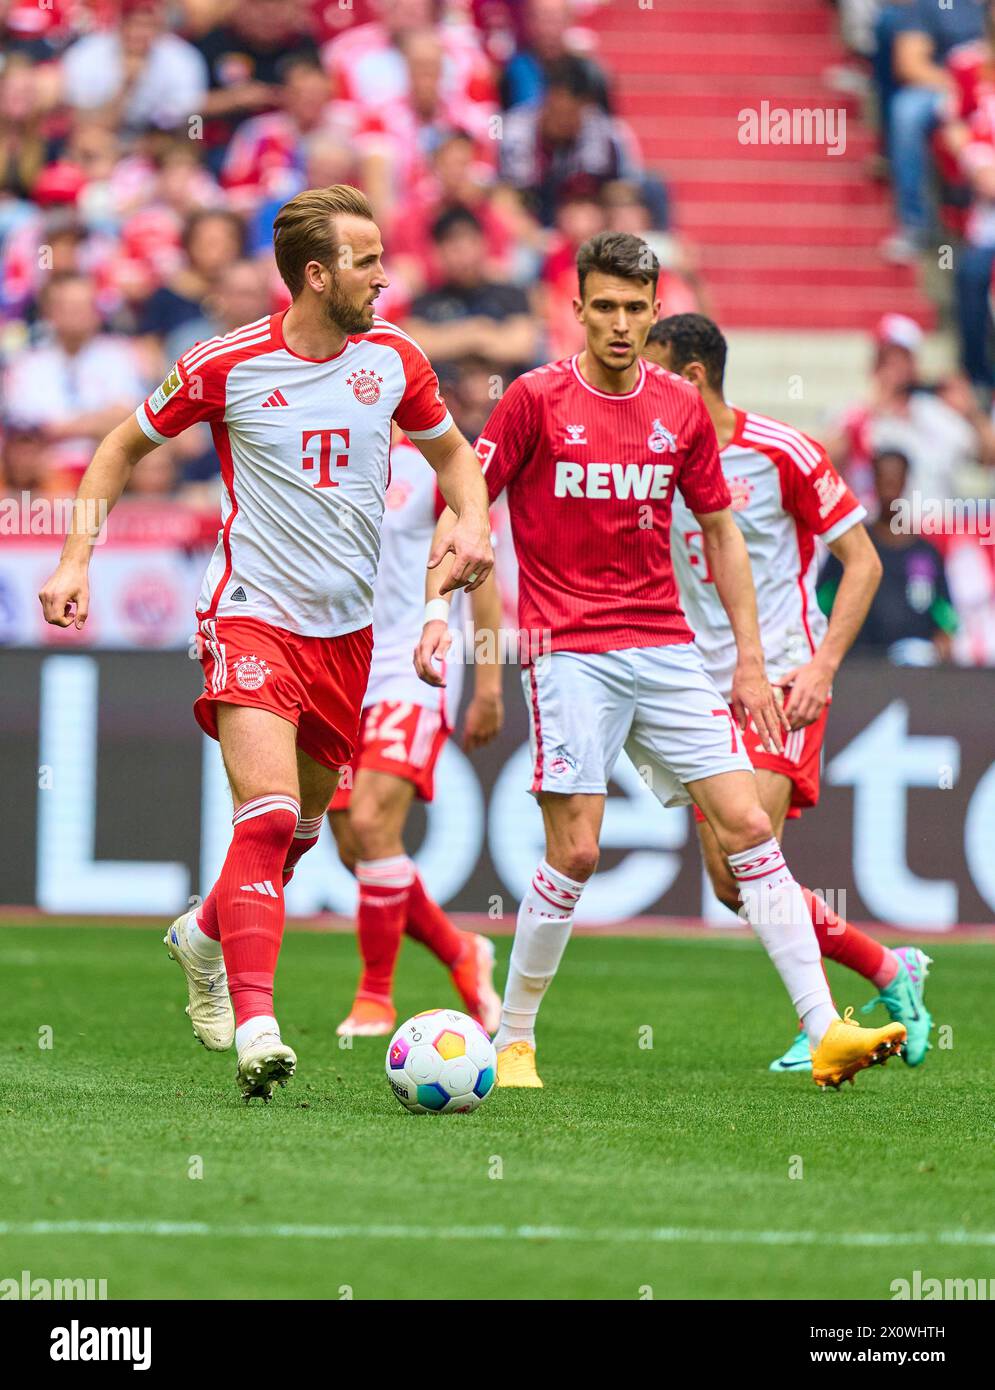 fcb9  compete for the ball, tackling, duel, header, zweikampf, action, fight against Dejan Ljubicic, 1.FCK 7   in the match  FC BAYERN MUENCHEN - 1.FC KOeLN 2-0   on April 13, 2024 in Munich, Germany. Season 2023/2024, 1.Bundesliga, FCB,, Muenchen, matchday 29, 29.Spieltag Photographer: ddp images / star-images    - DFL REGULATIONS PROHIBIT ANY USE OF PHOTOGRAPHS as IMAGE SEQUENCES and/or QUASI-VIDEO - Stock Photo